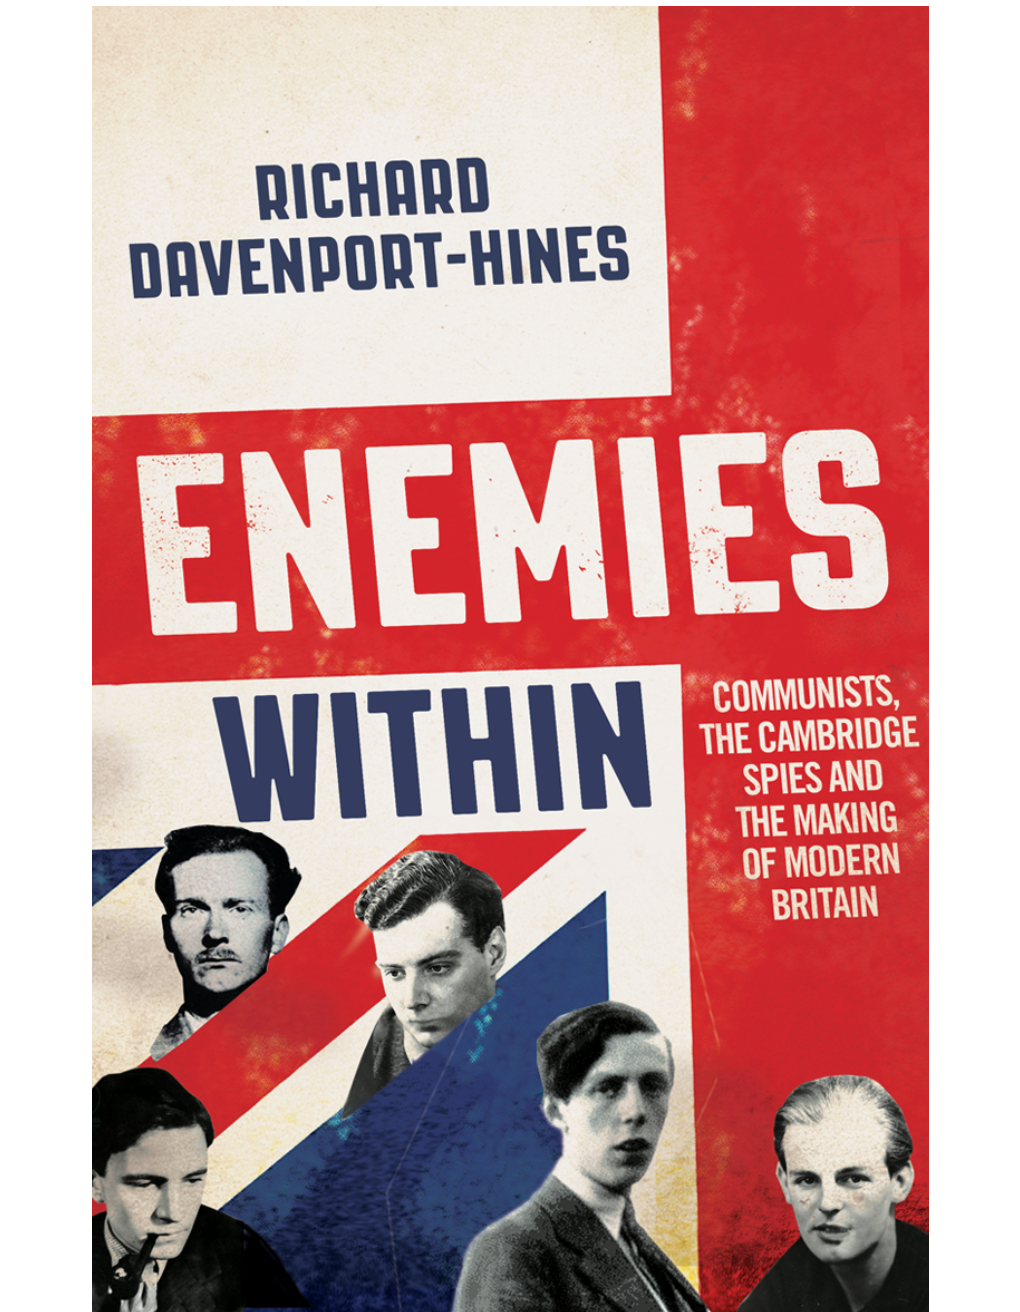 Communists, the Cambridge Spies and the Making of Modern Britain